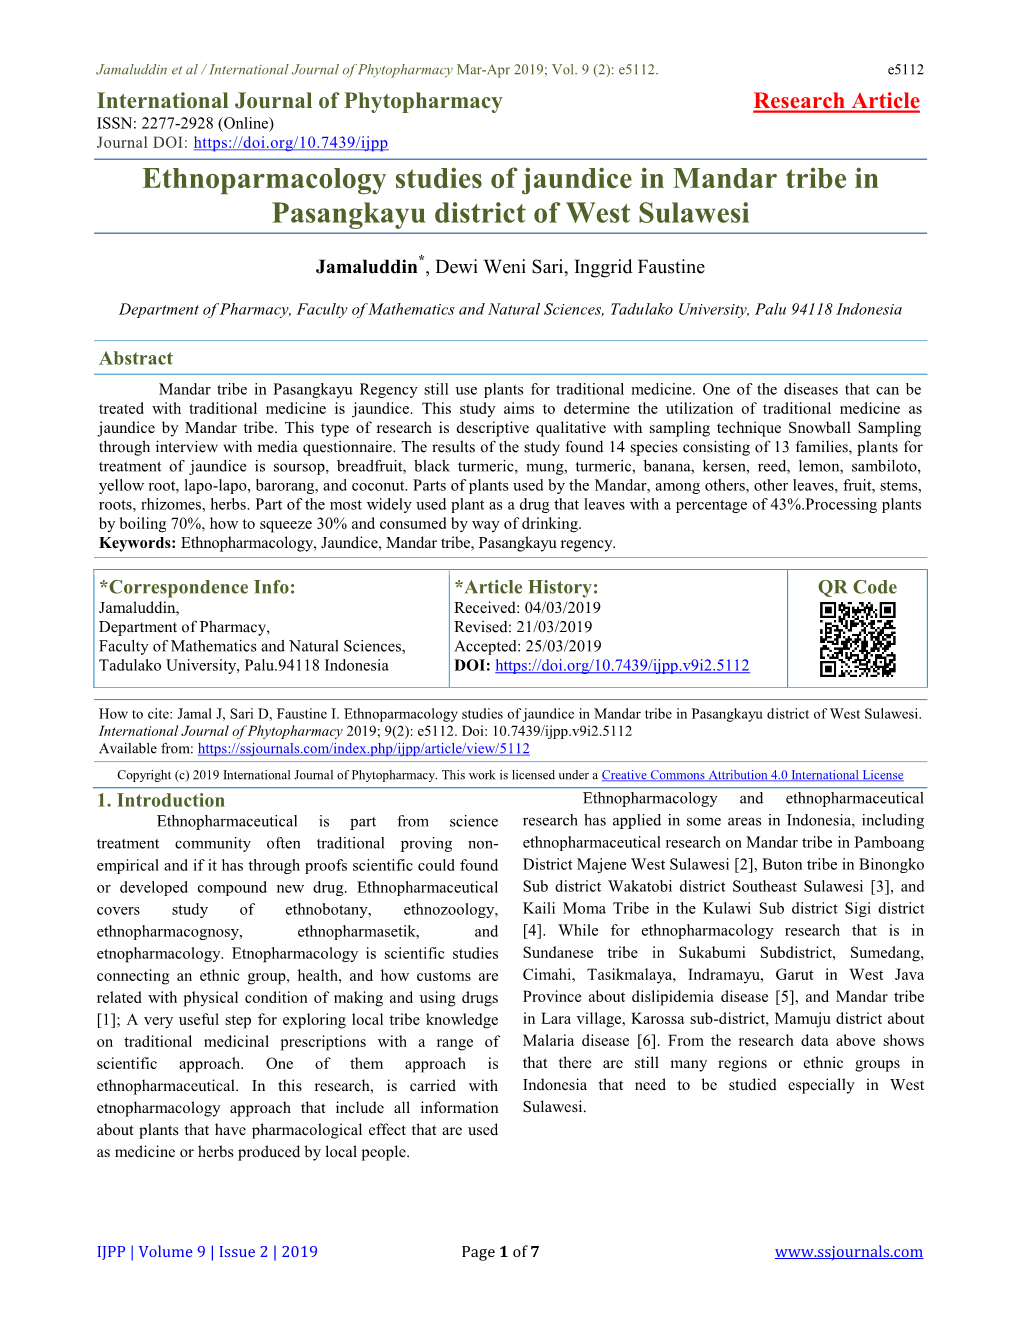 Ethnoparmacology Studies of Jaundice in Mandar Tribe in Pasangkayu District of West Sulawesi